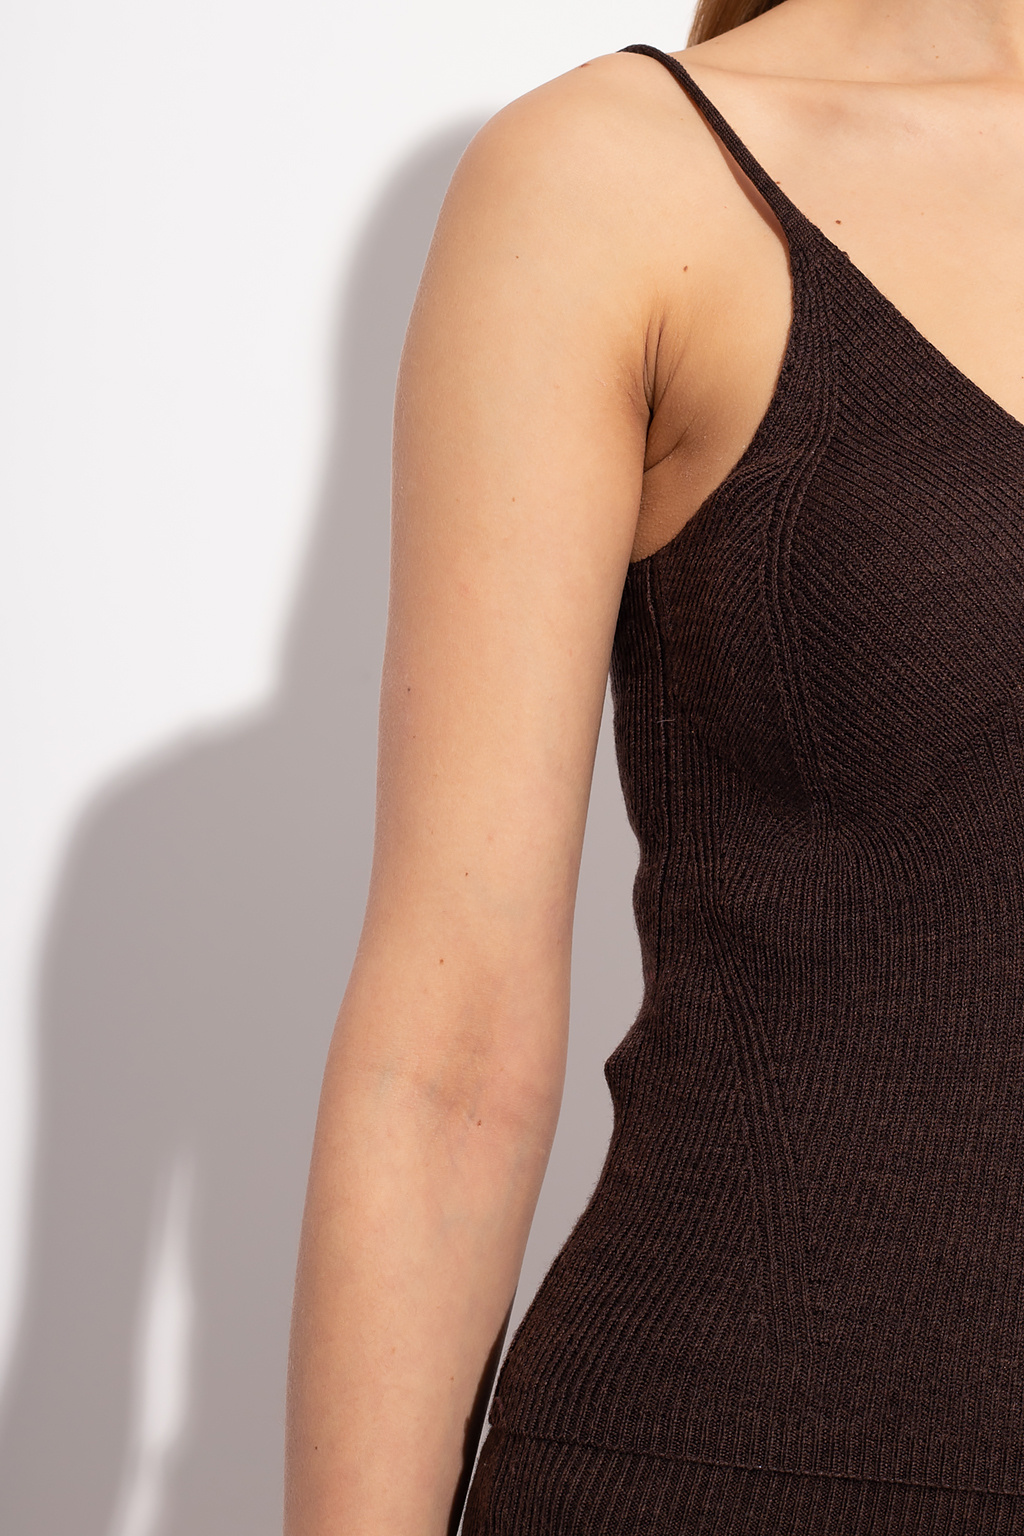 GOLDEN GOOSE: THE PERFECT IMPERFECTION  Ribbed tank top